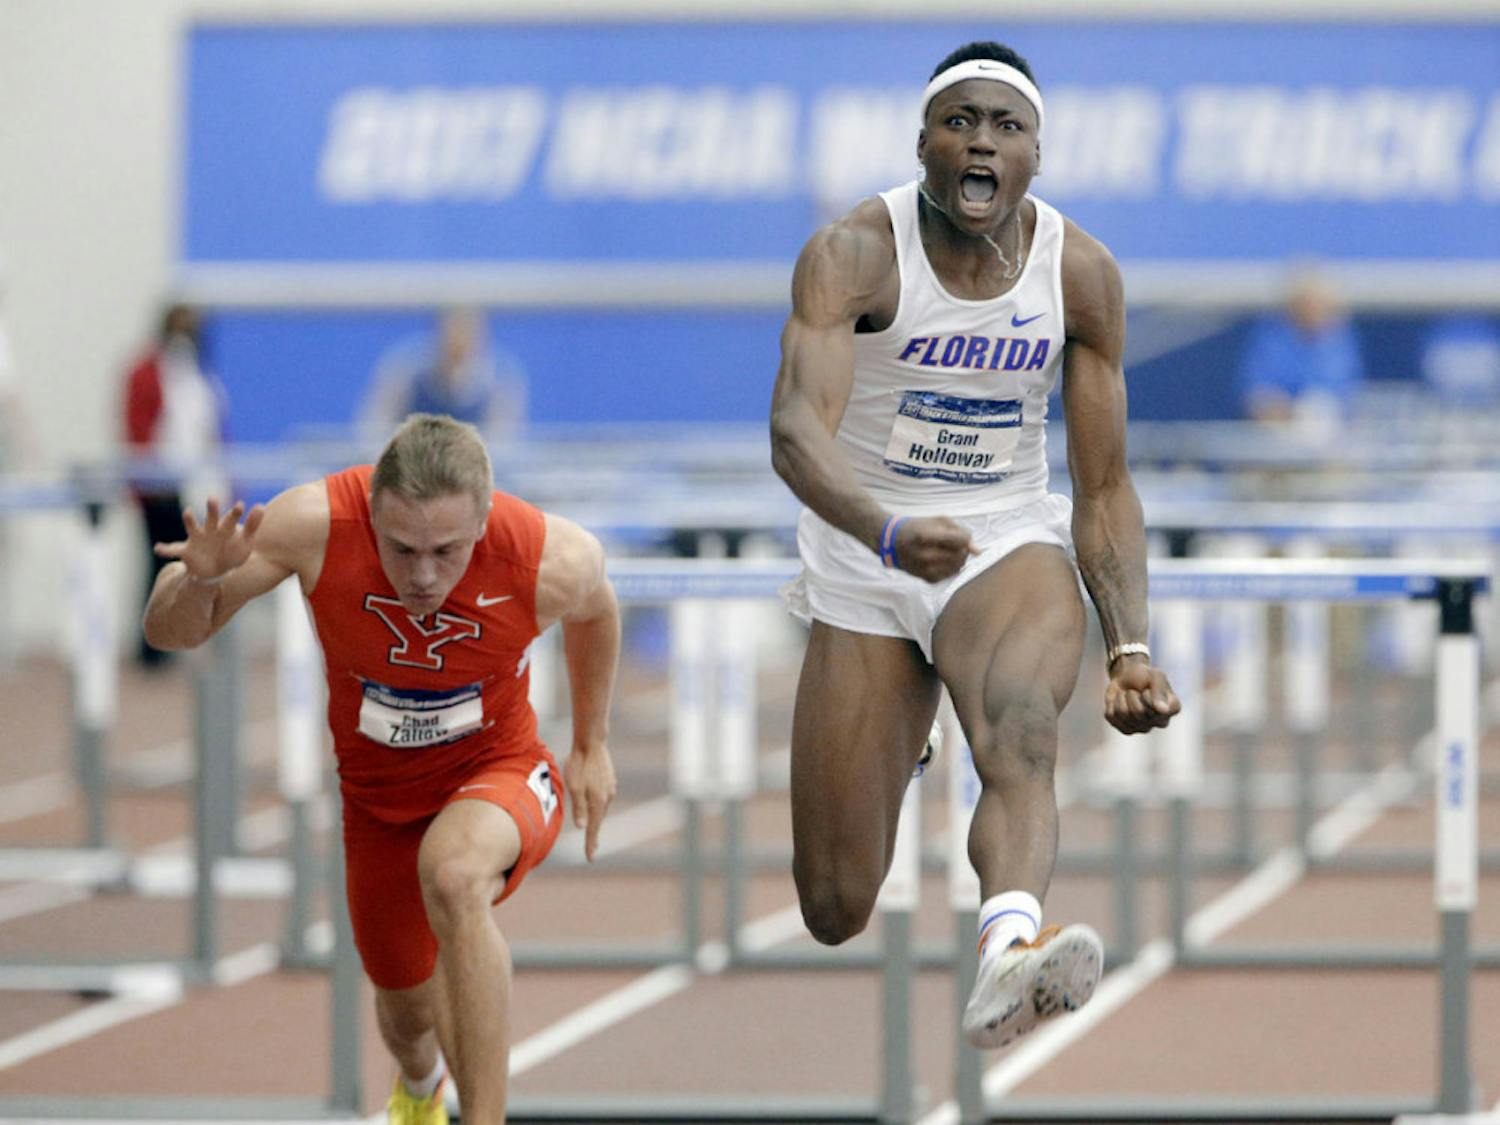 Sophomore Grant Holloway will defend his NCAA Championship title on Friday in Eugene, Oregon